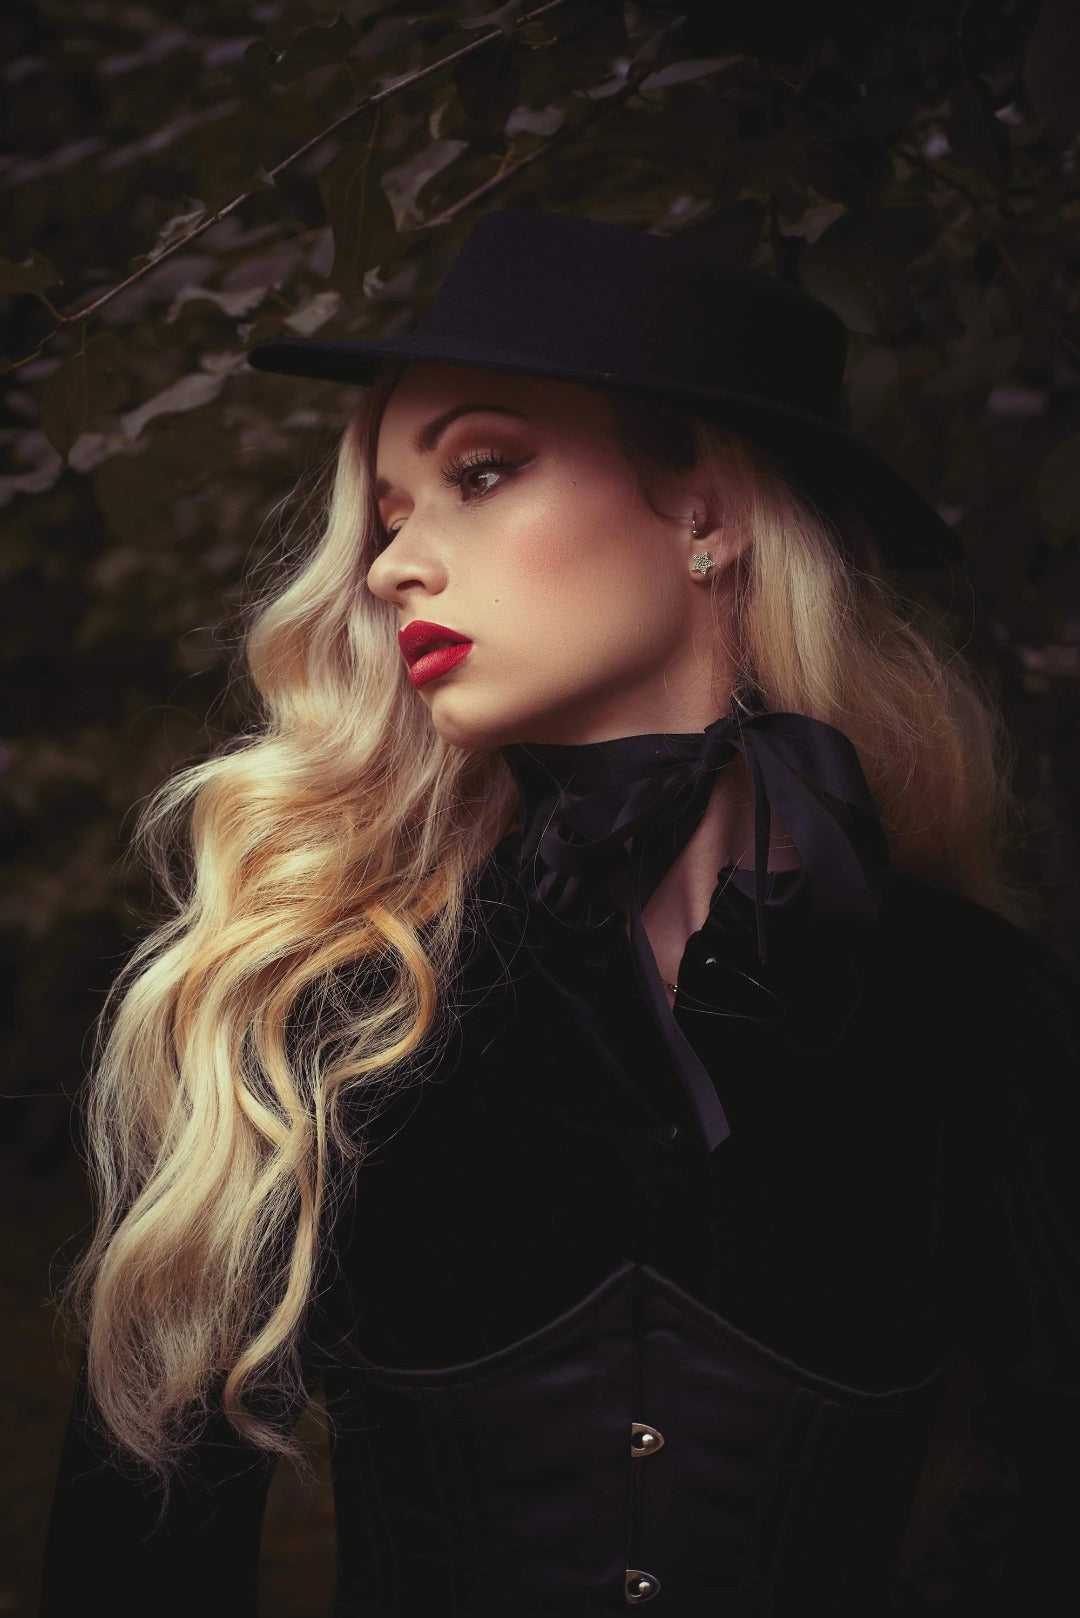 A pinup model posing in side profile in front of a tree while wearing the American Gothic mini hat in black.